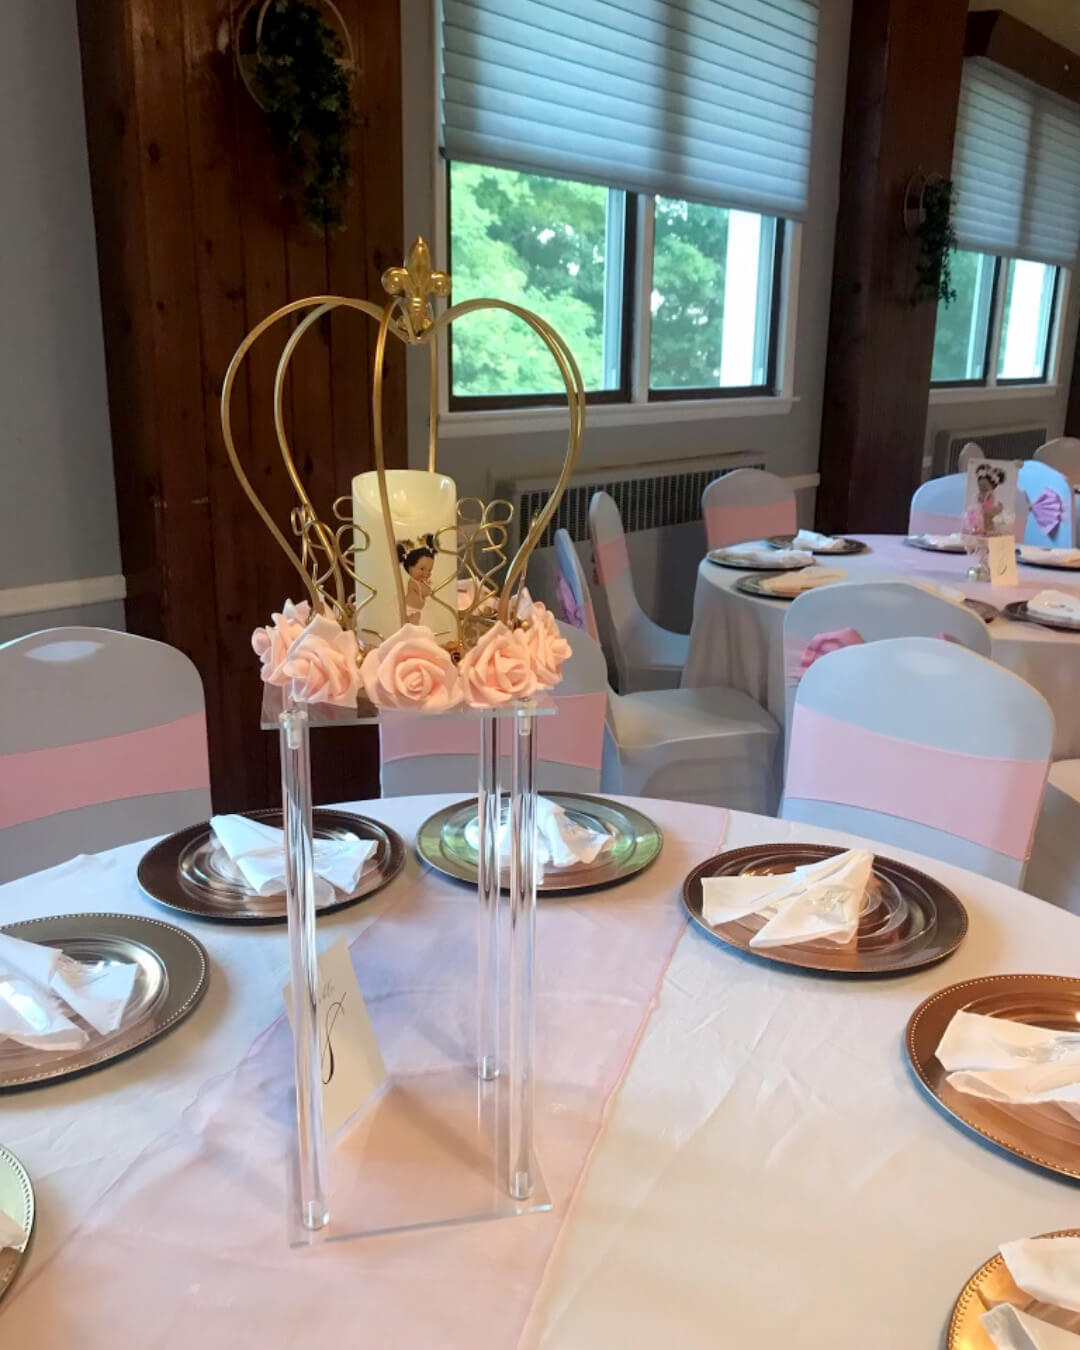 Clarkstown Church Facility Use for wedding